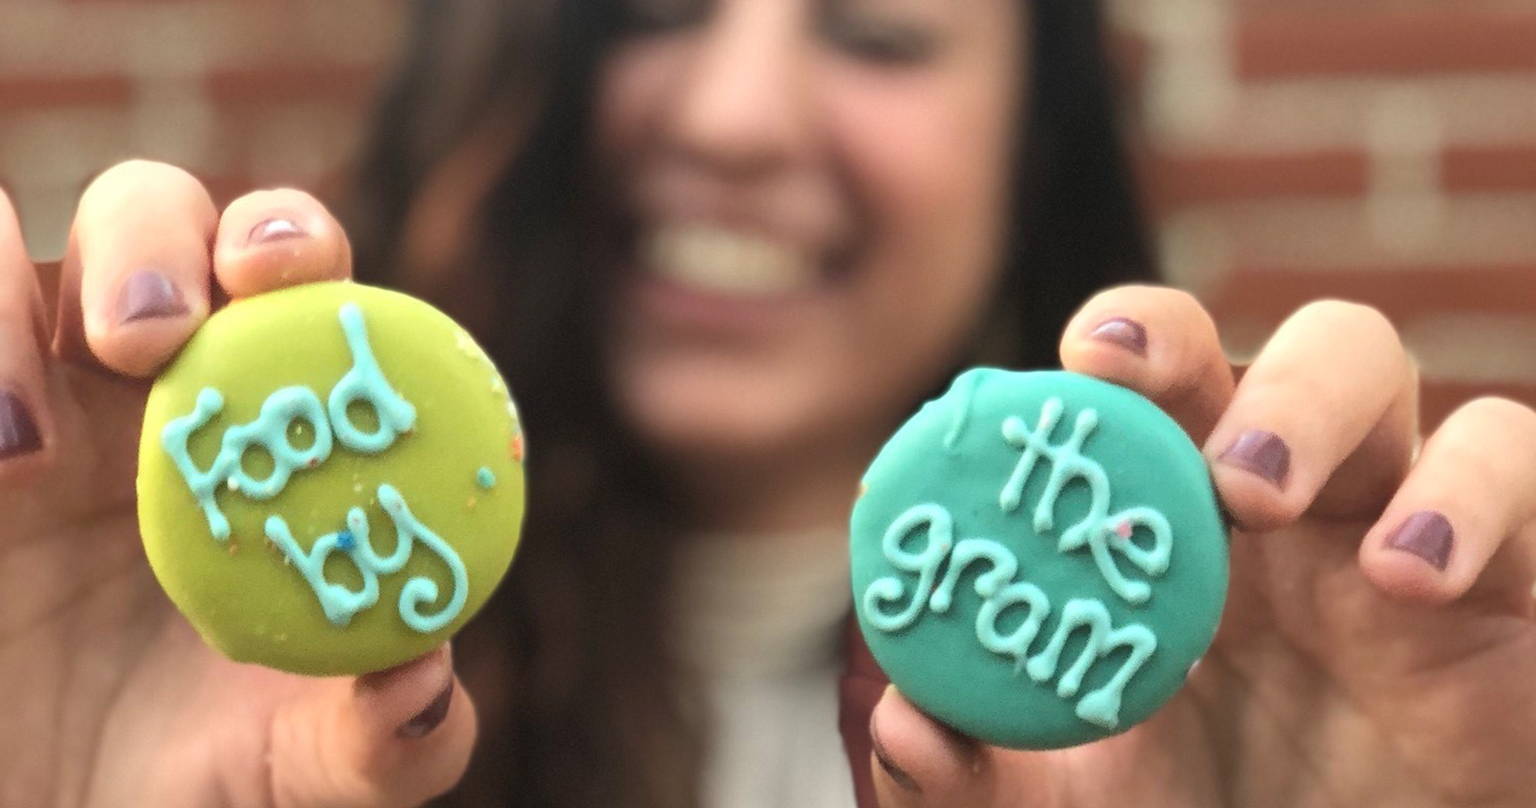 A woman holds cookies that say "food by the gram"